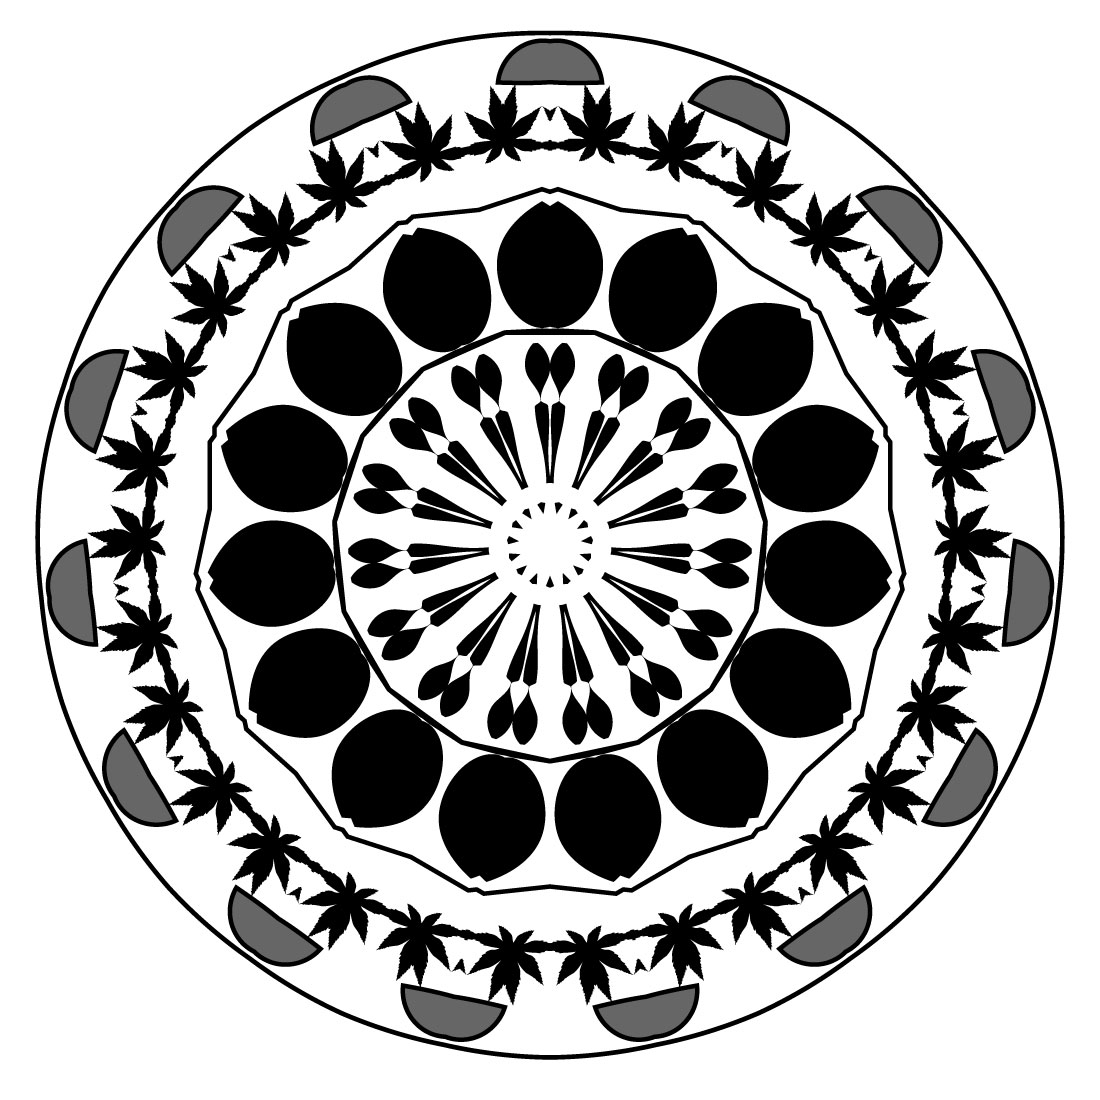 Mandala Art leaf in black and white preview image.